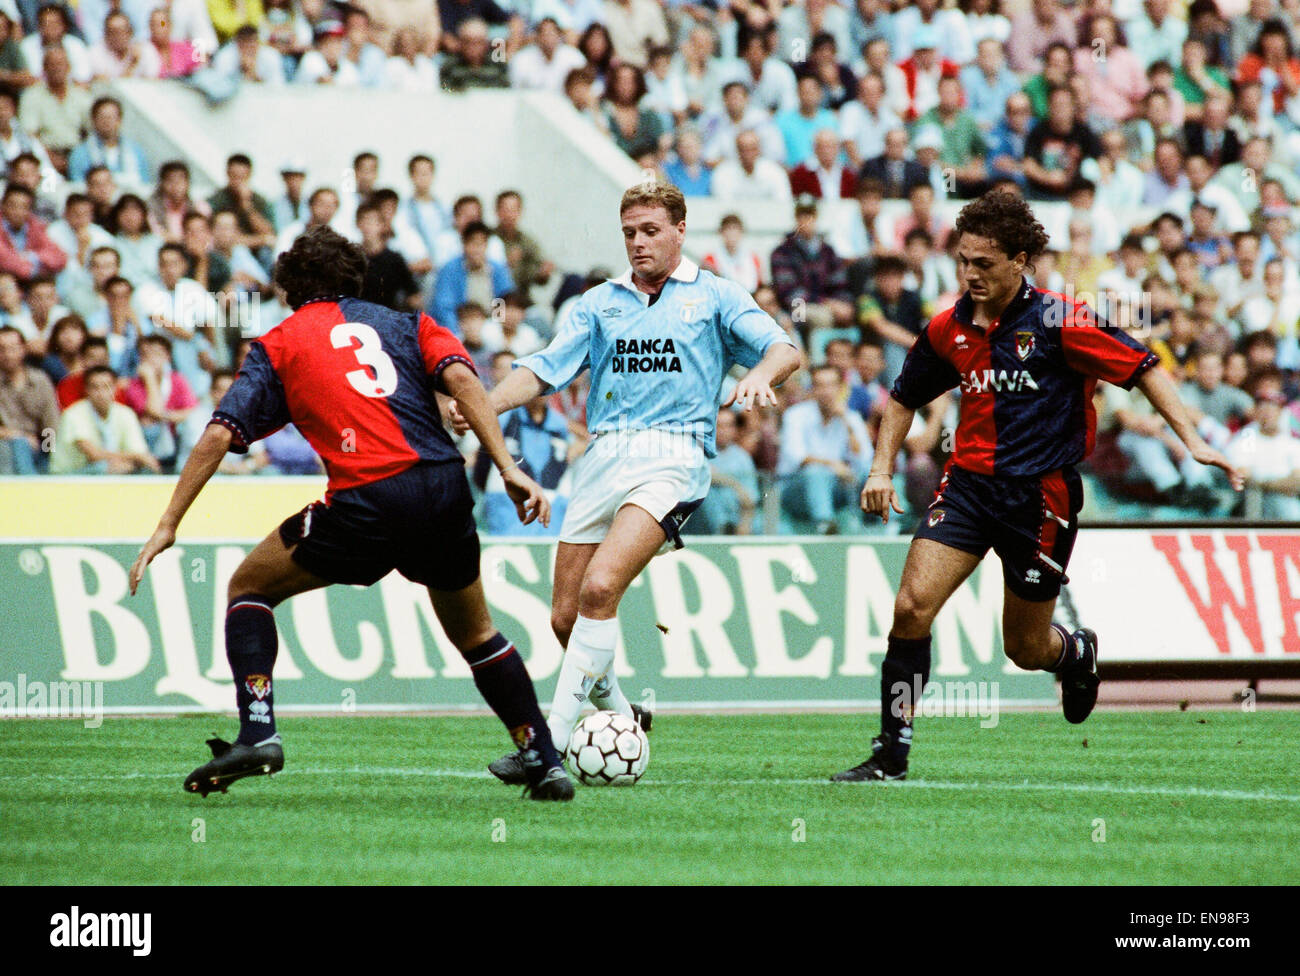 Italian Serie A league match at the Stadio Olimpico, Rome. Lazio v Genoa. Paul Gascoigne of Lazio on the ball faced by two Genoa defenders as he makes his debut. 28th September 1992. Stock Photo